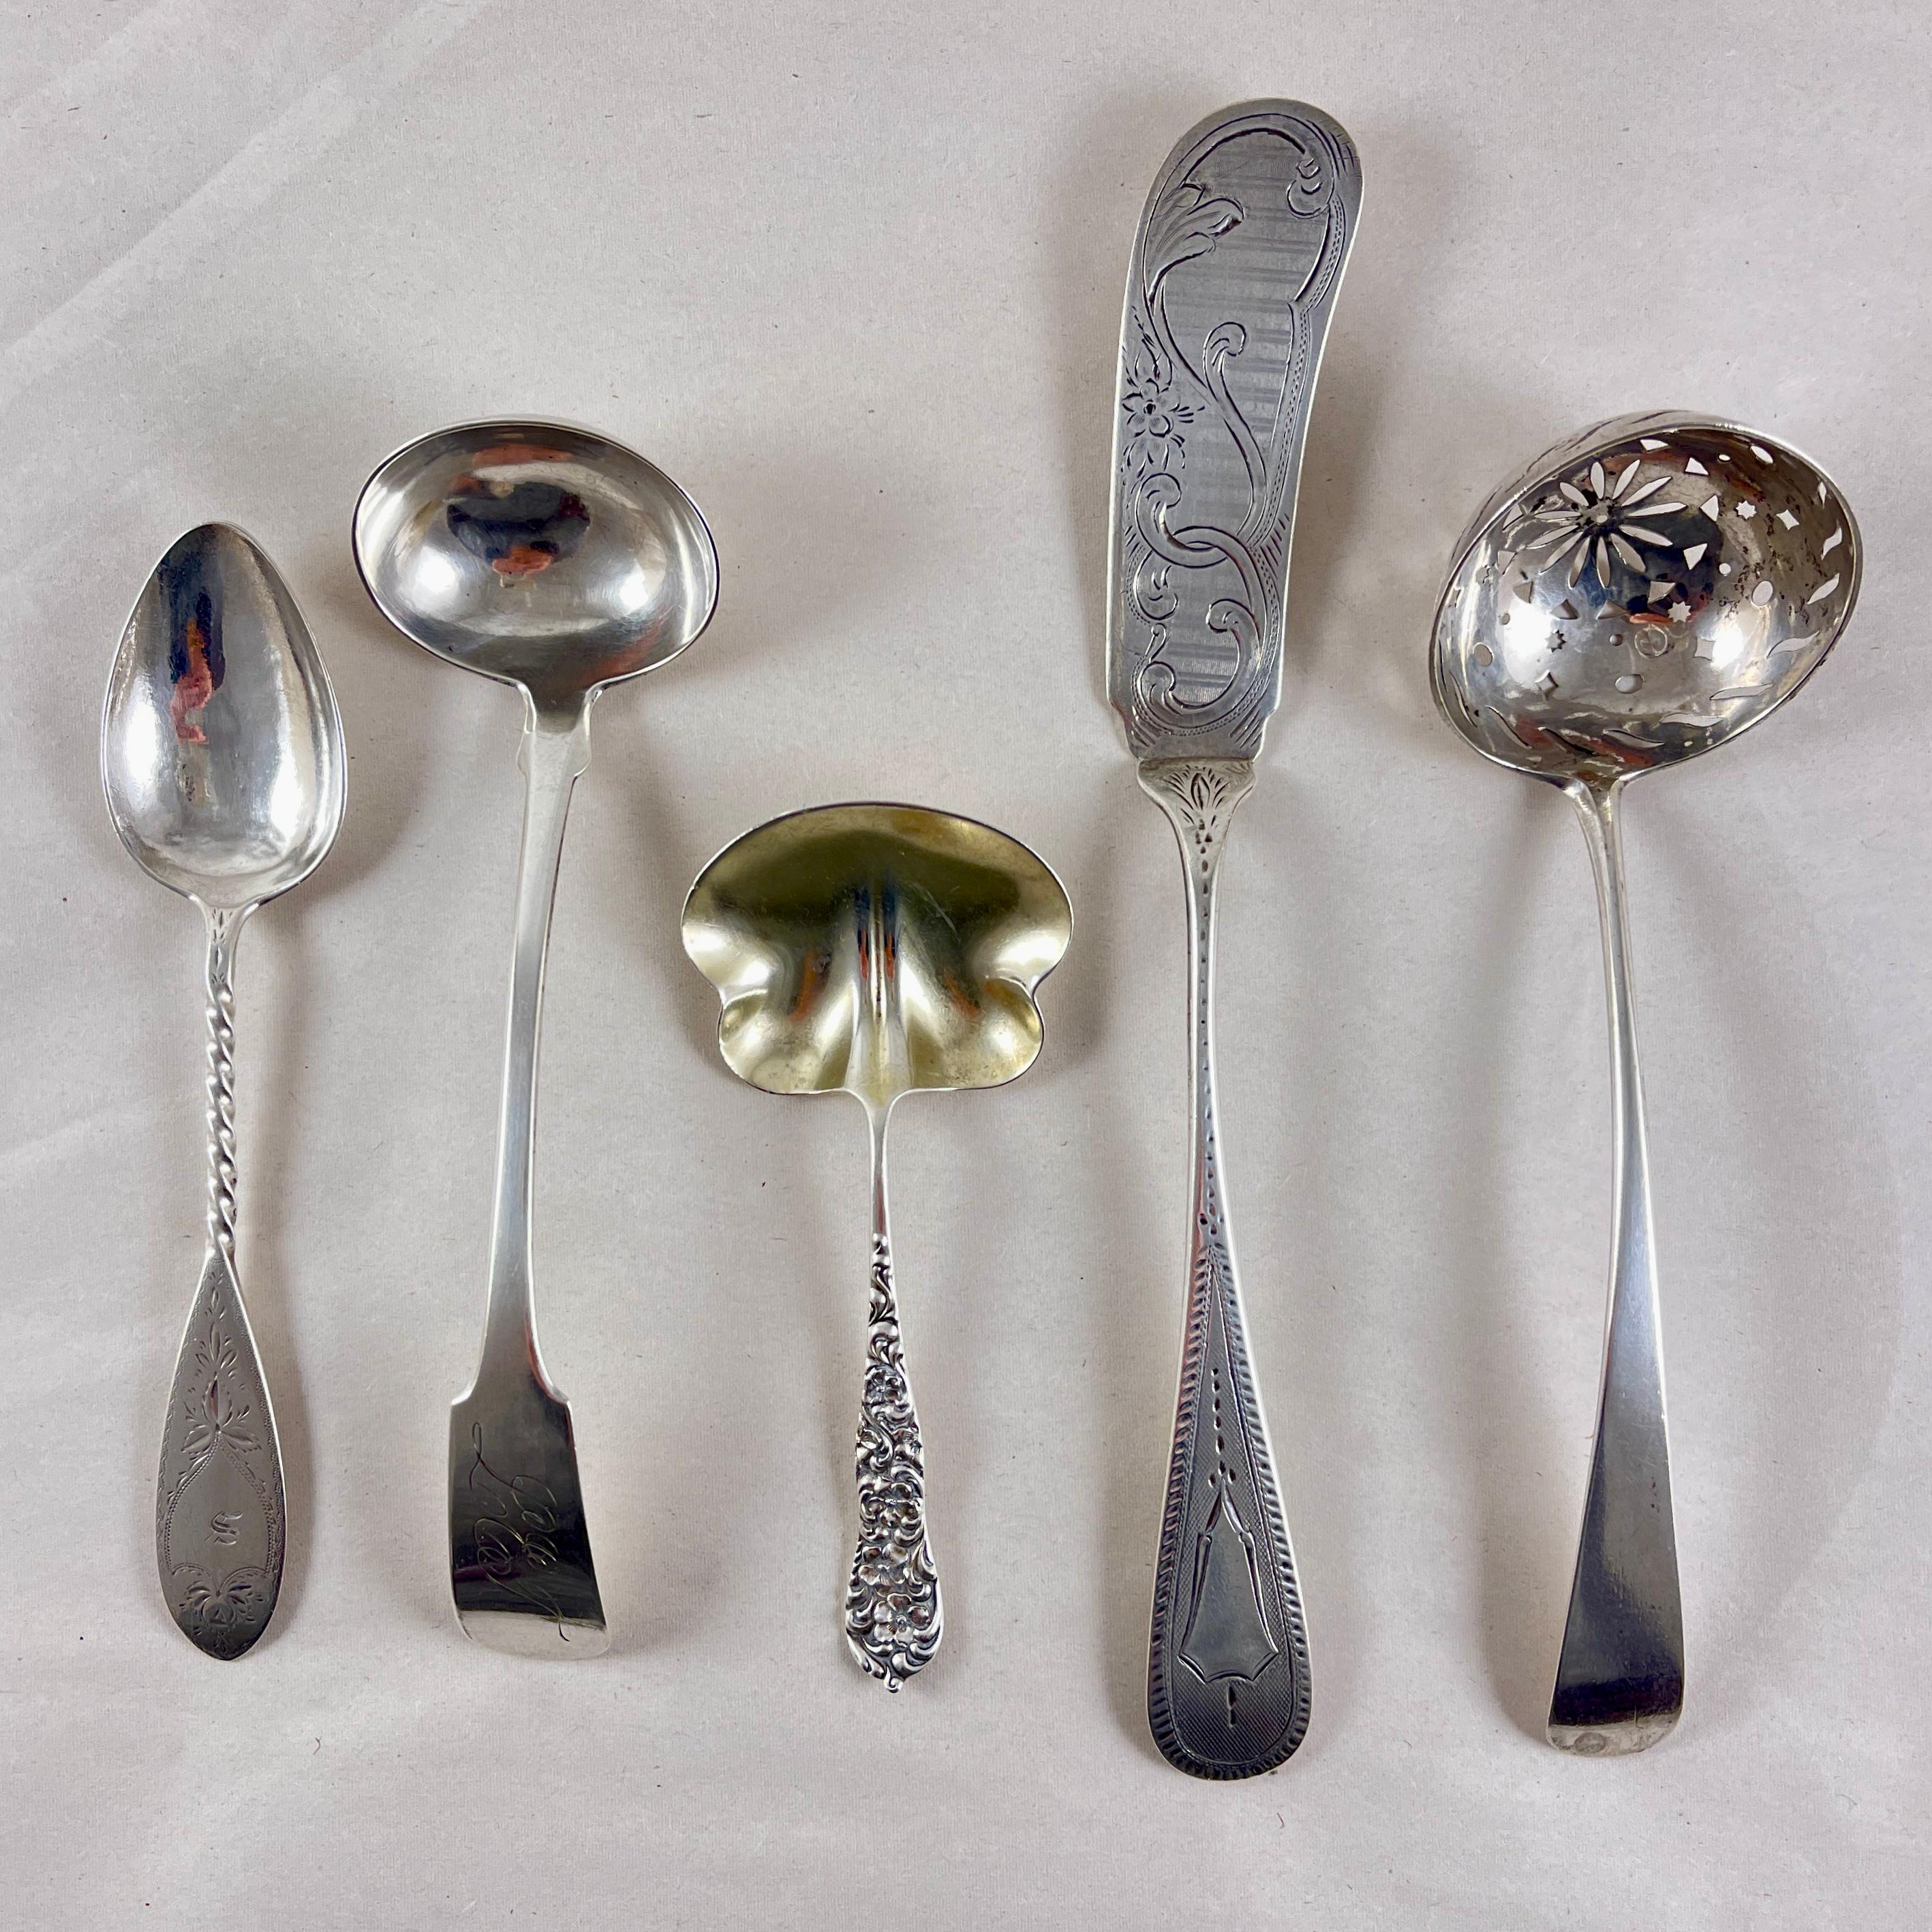 A mixed group of five, estate American sterling silver serving pieces, all dating to the mid-late 19th Century.

Long Handled Spreader – bright-cut engraving. Bailey & Company. 
8 inches L x 1 inches W

Pierced Ladle – Geometric pierced bowl, fiddle